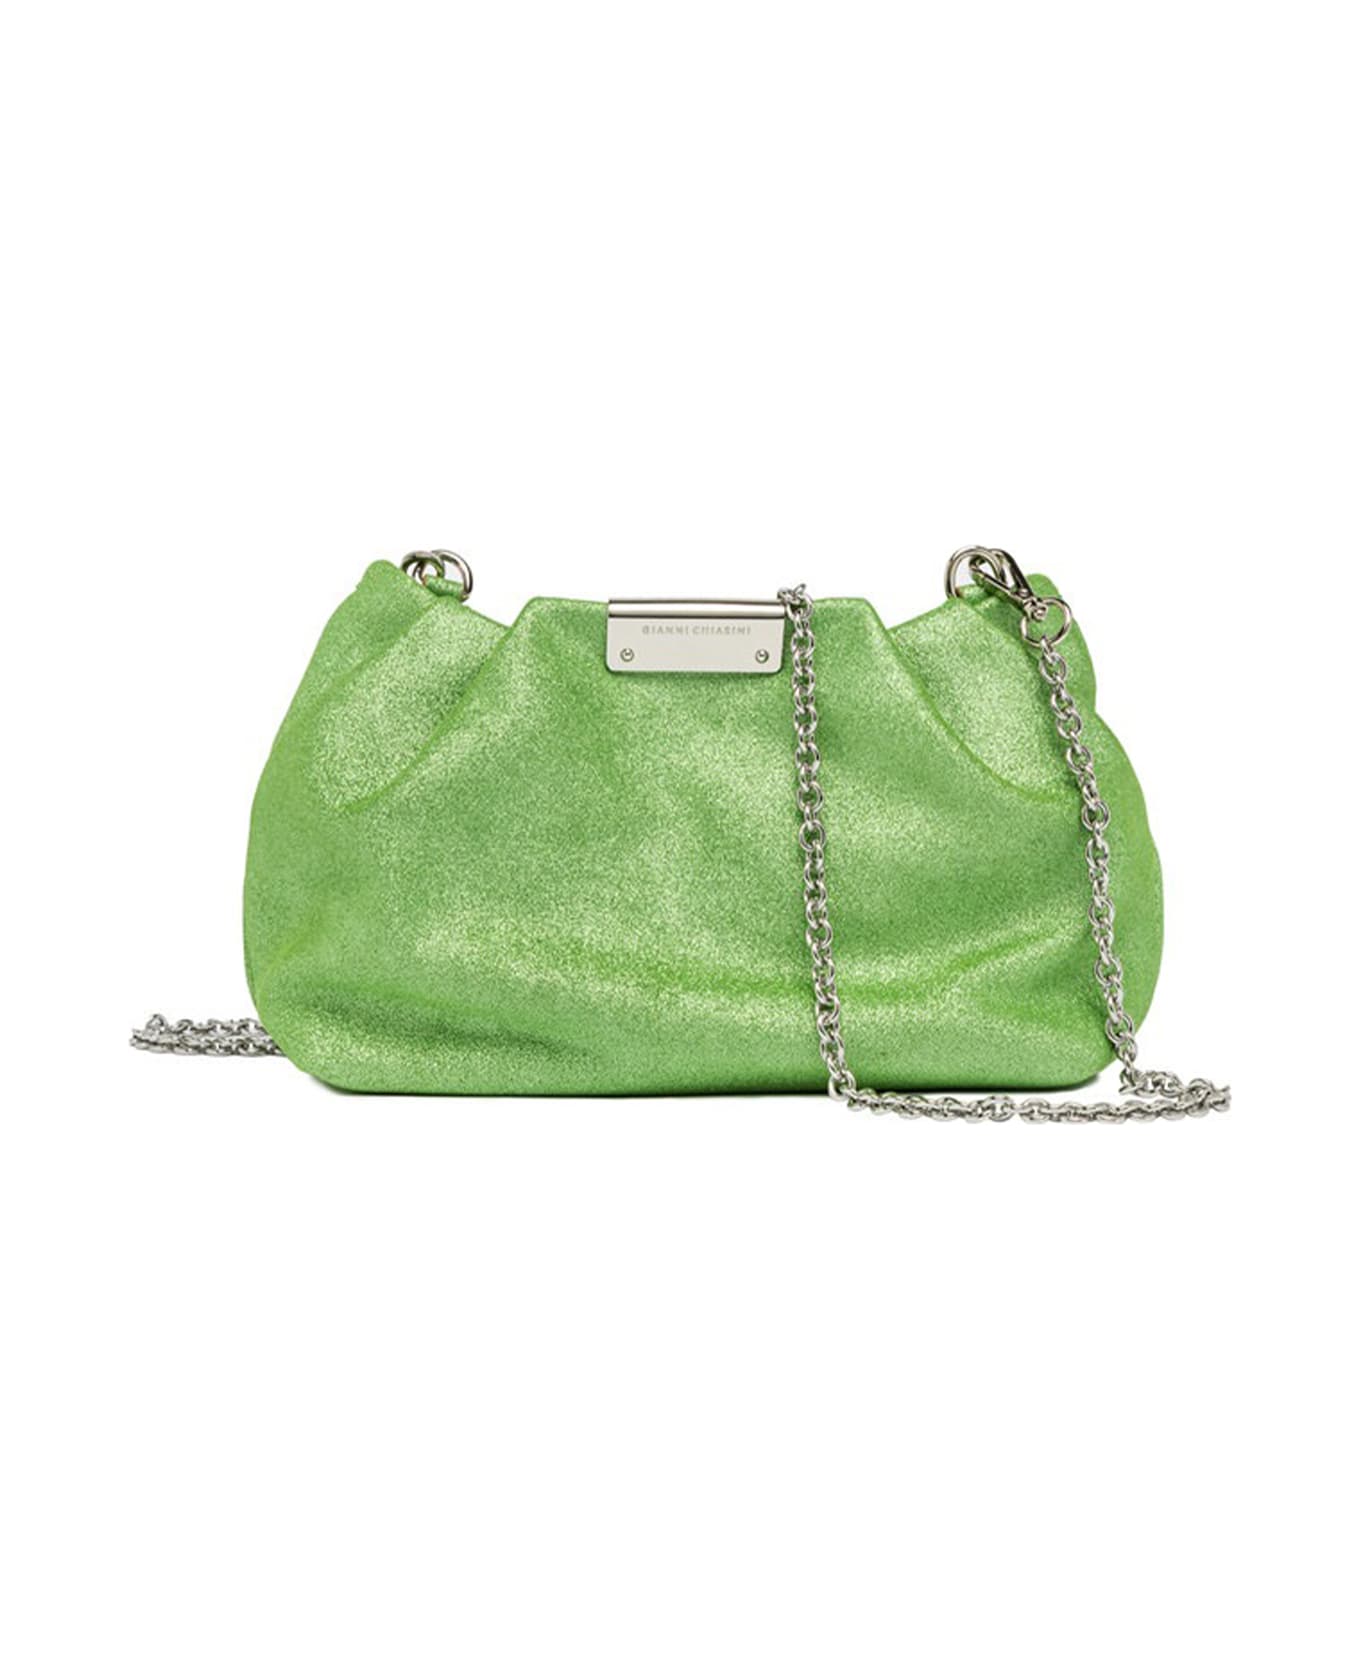 Gianni Chiarini Green Glitter Pearl Clutch Bag With Curled Effect - ACERBO